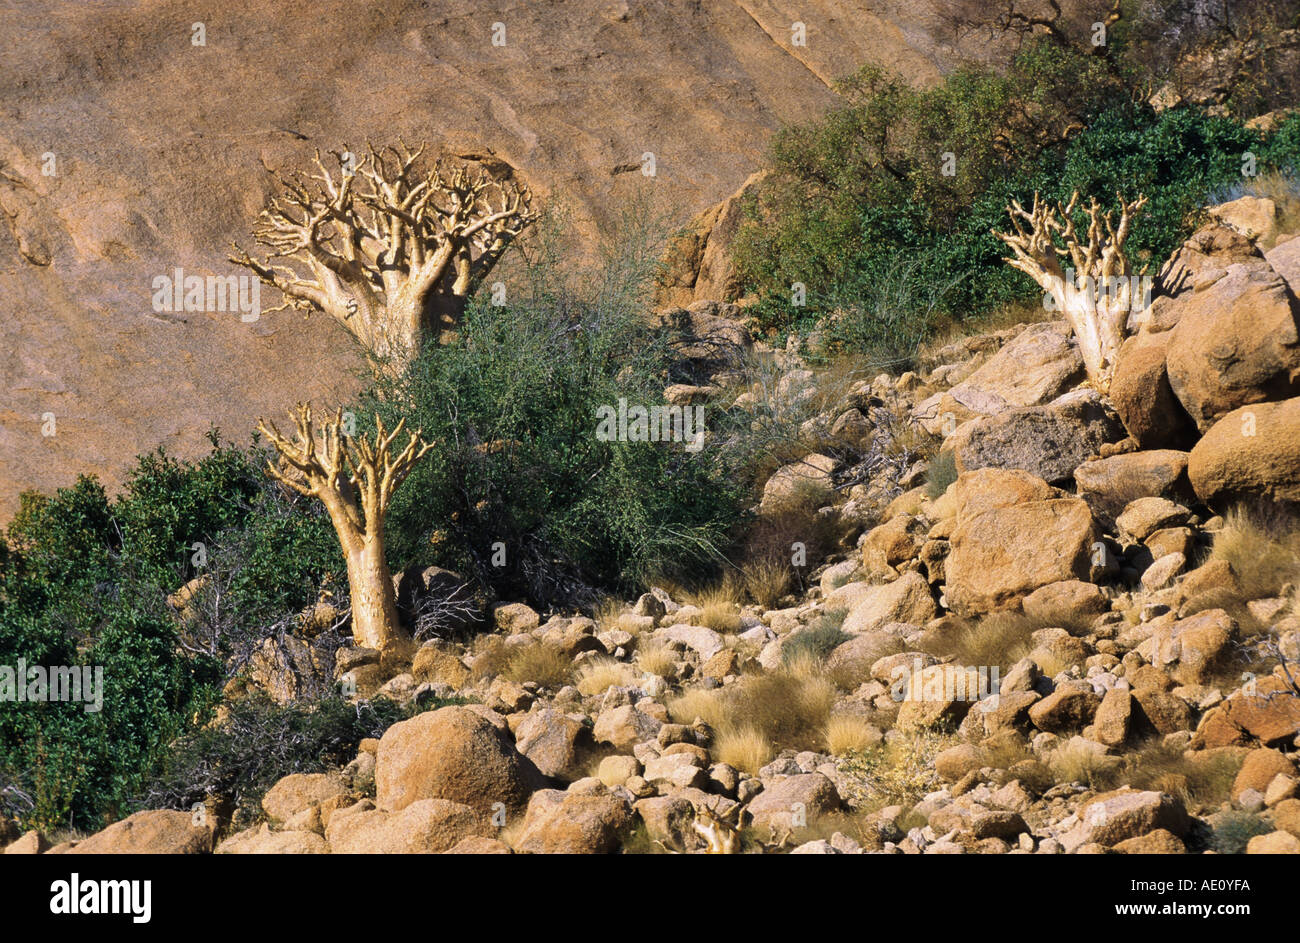 blue-leaved commiphora (Commiphora glaucescens), three trees on a rocky slope, Namibia Stock Photo